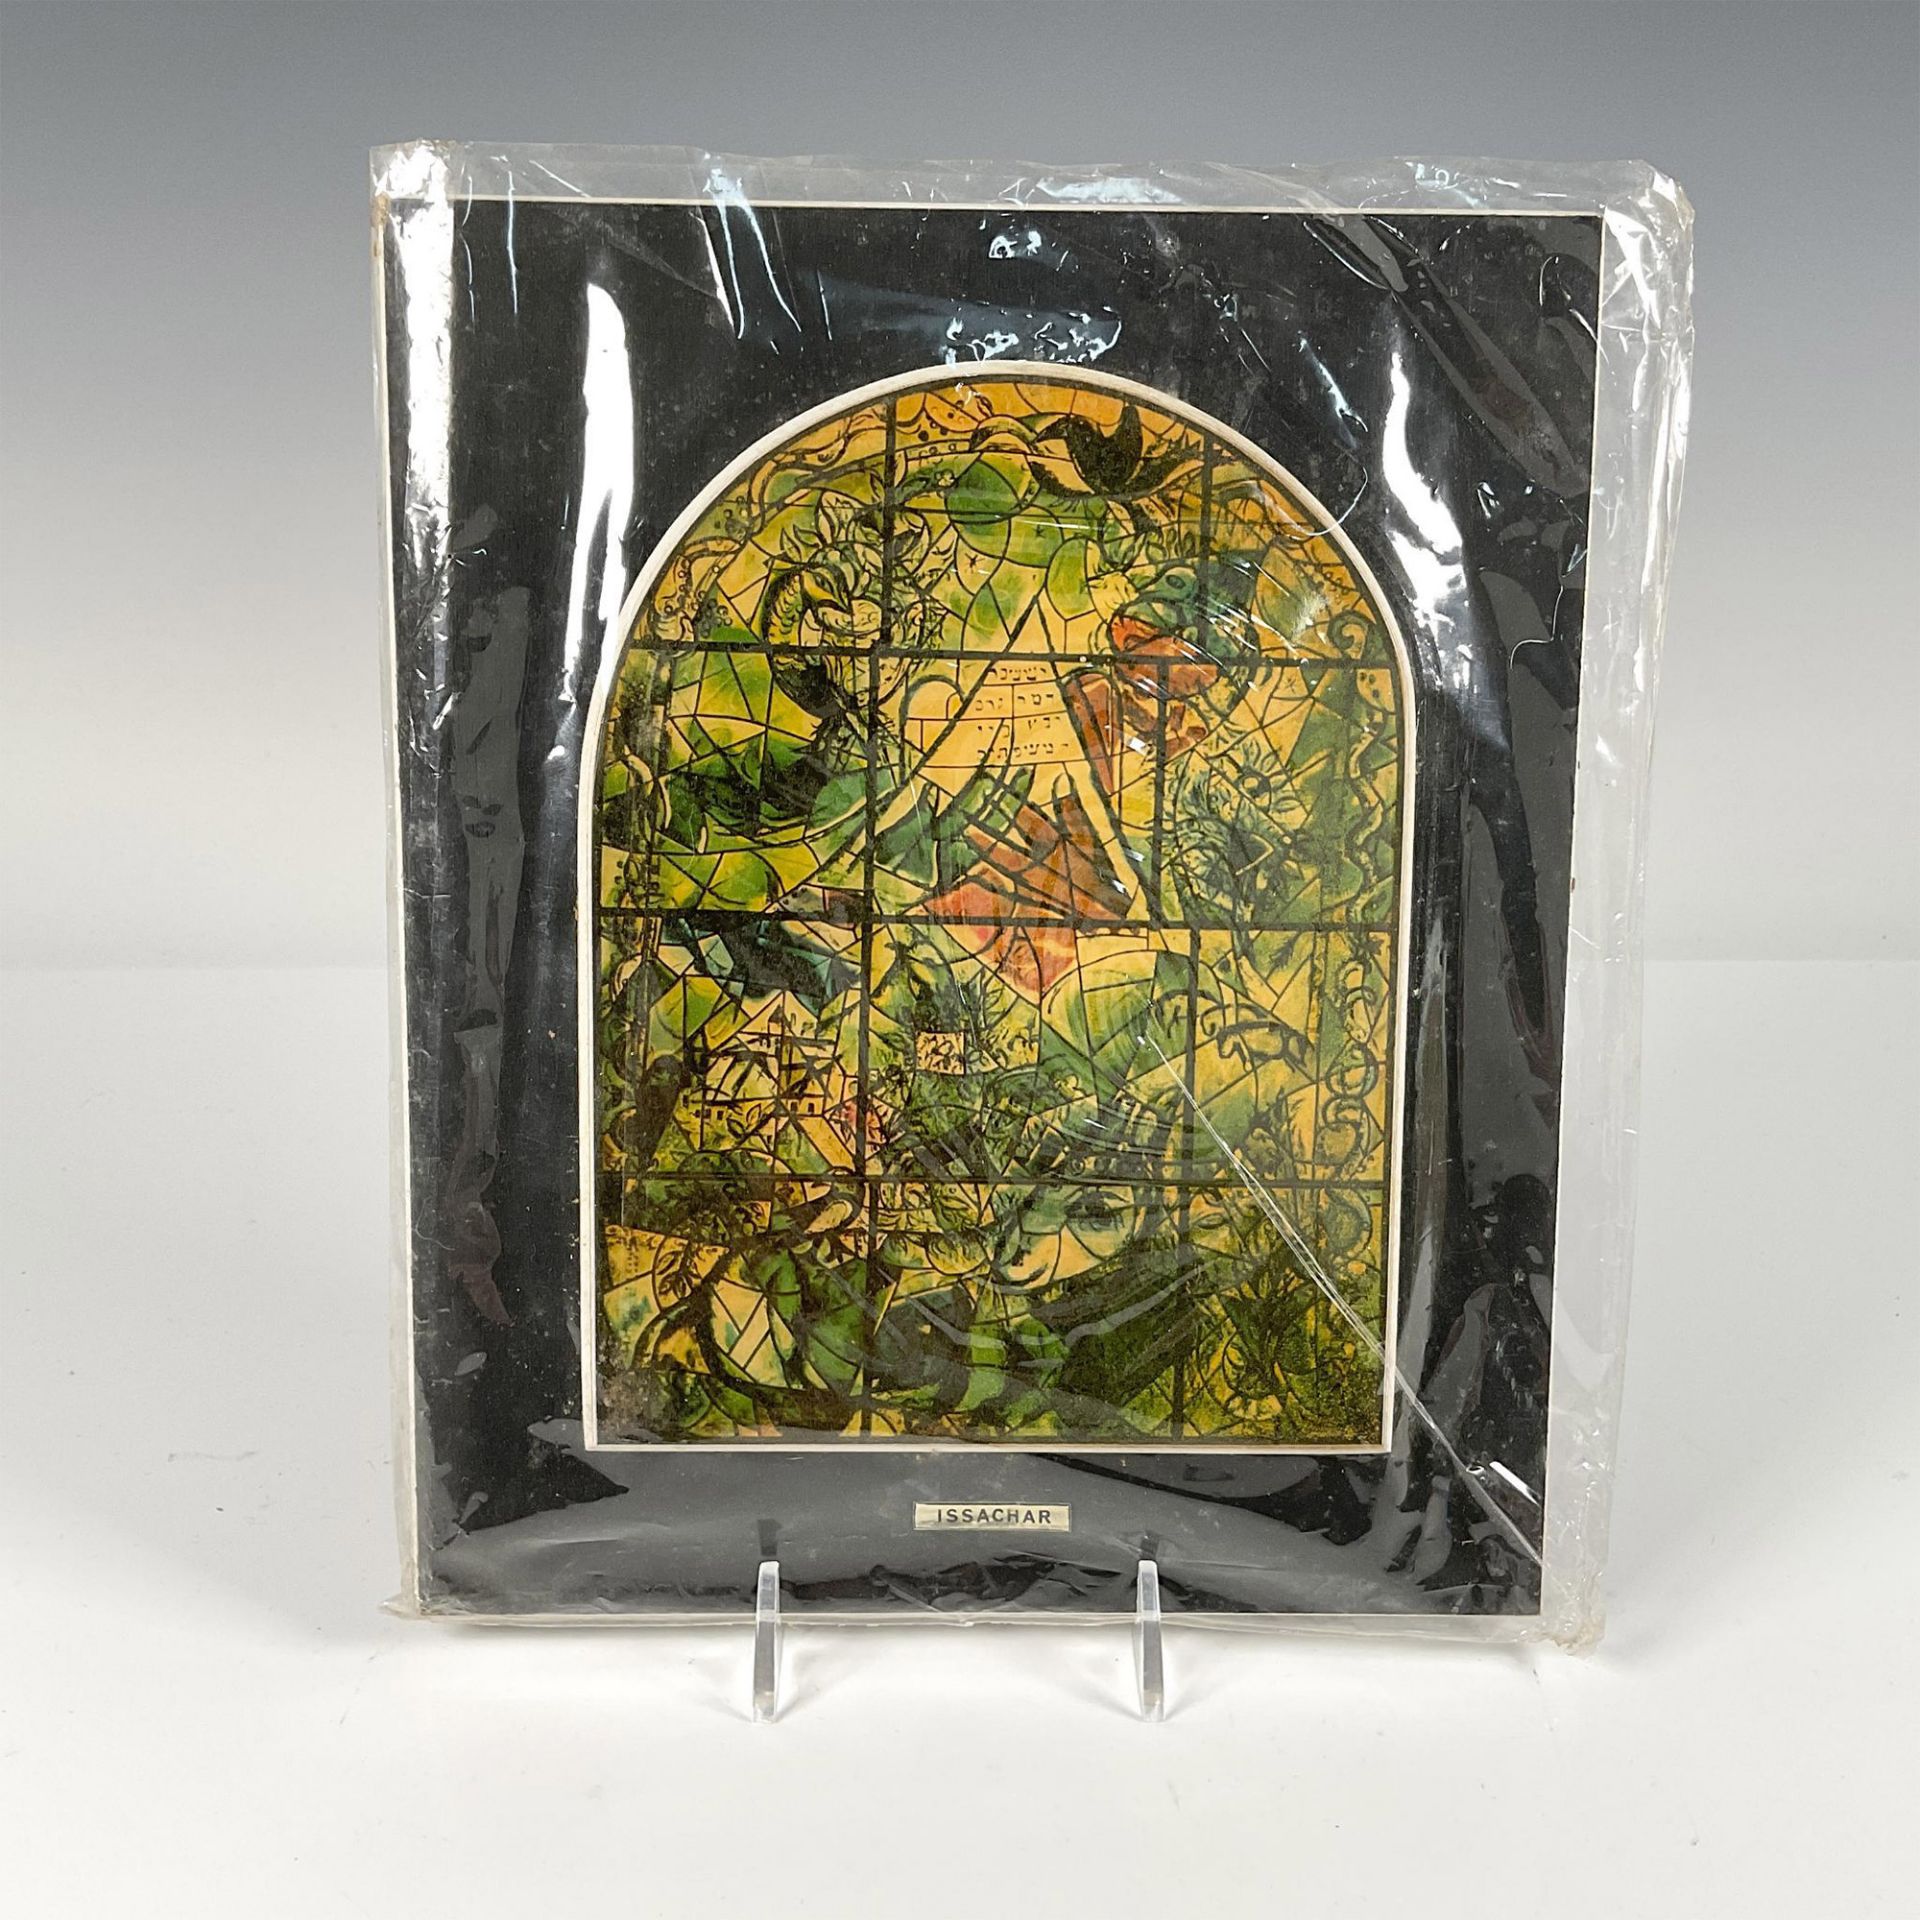 13pc After Marc Chagall by Avissar Wooden Plaques, The 12 Stained Glass Windows - Image 13 of 20